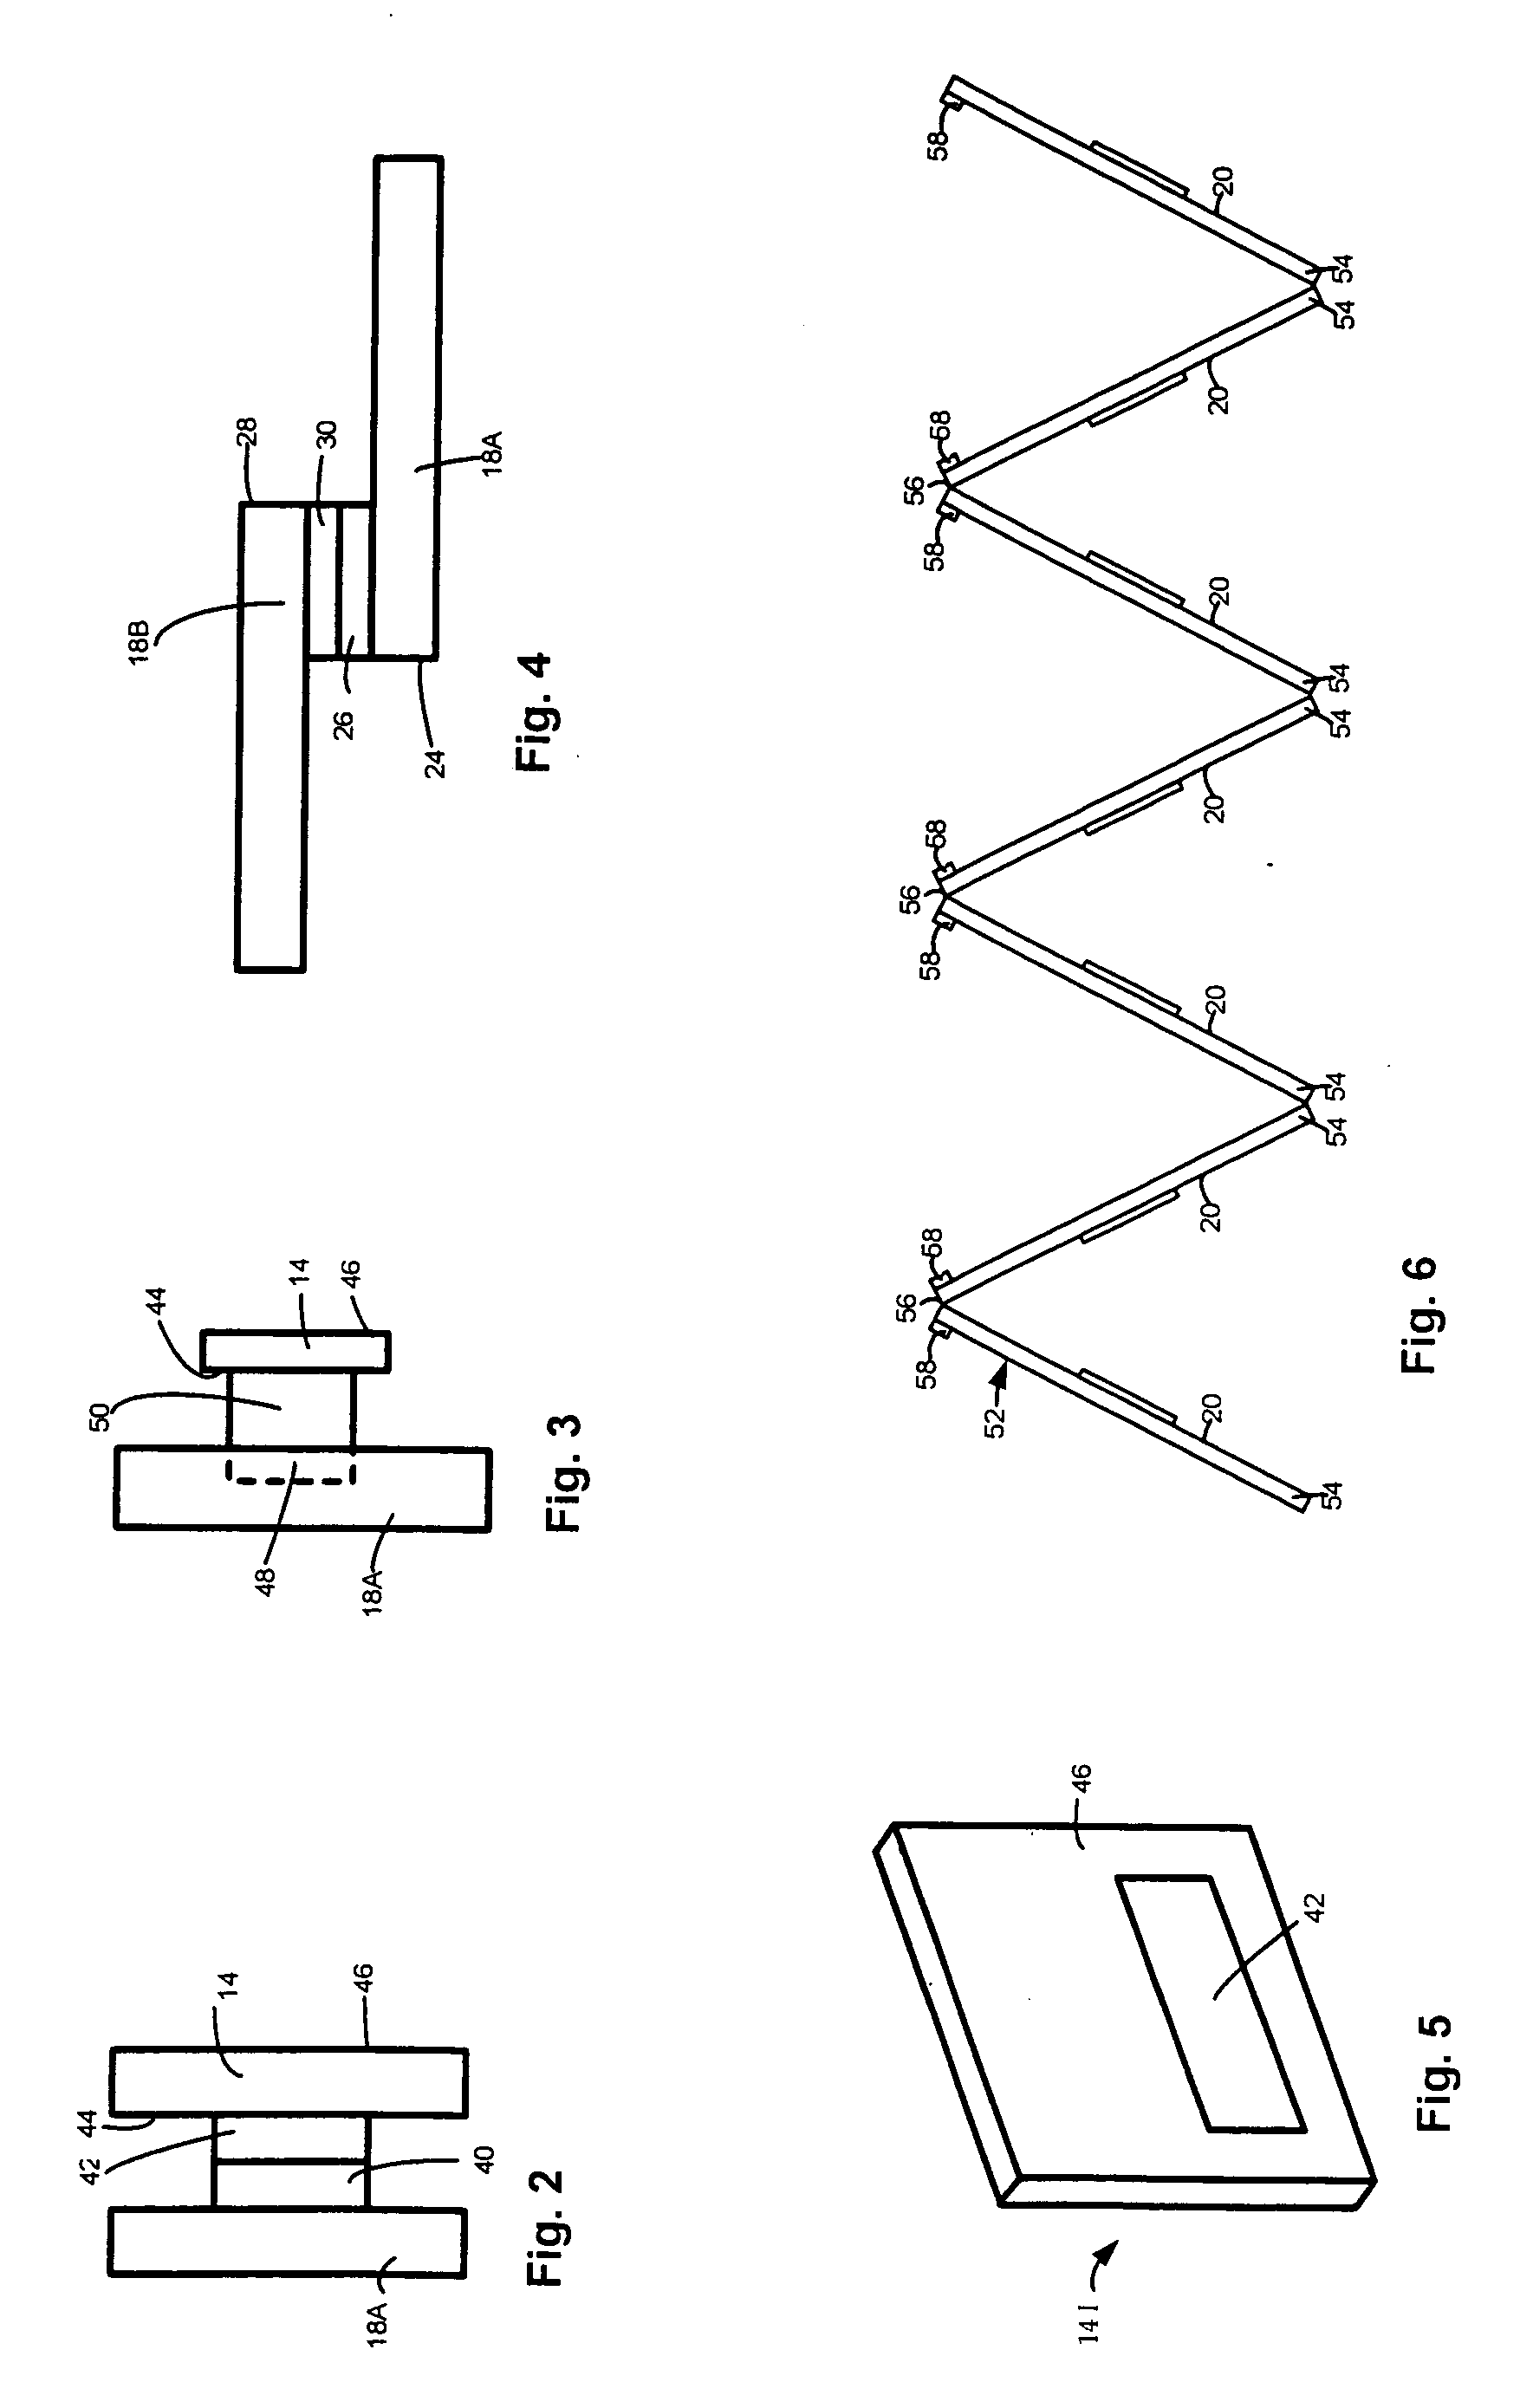 Activity scheduling device